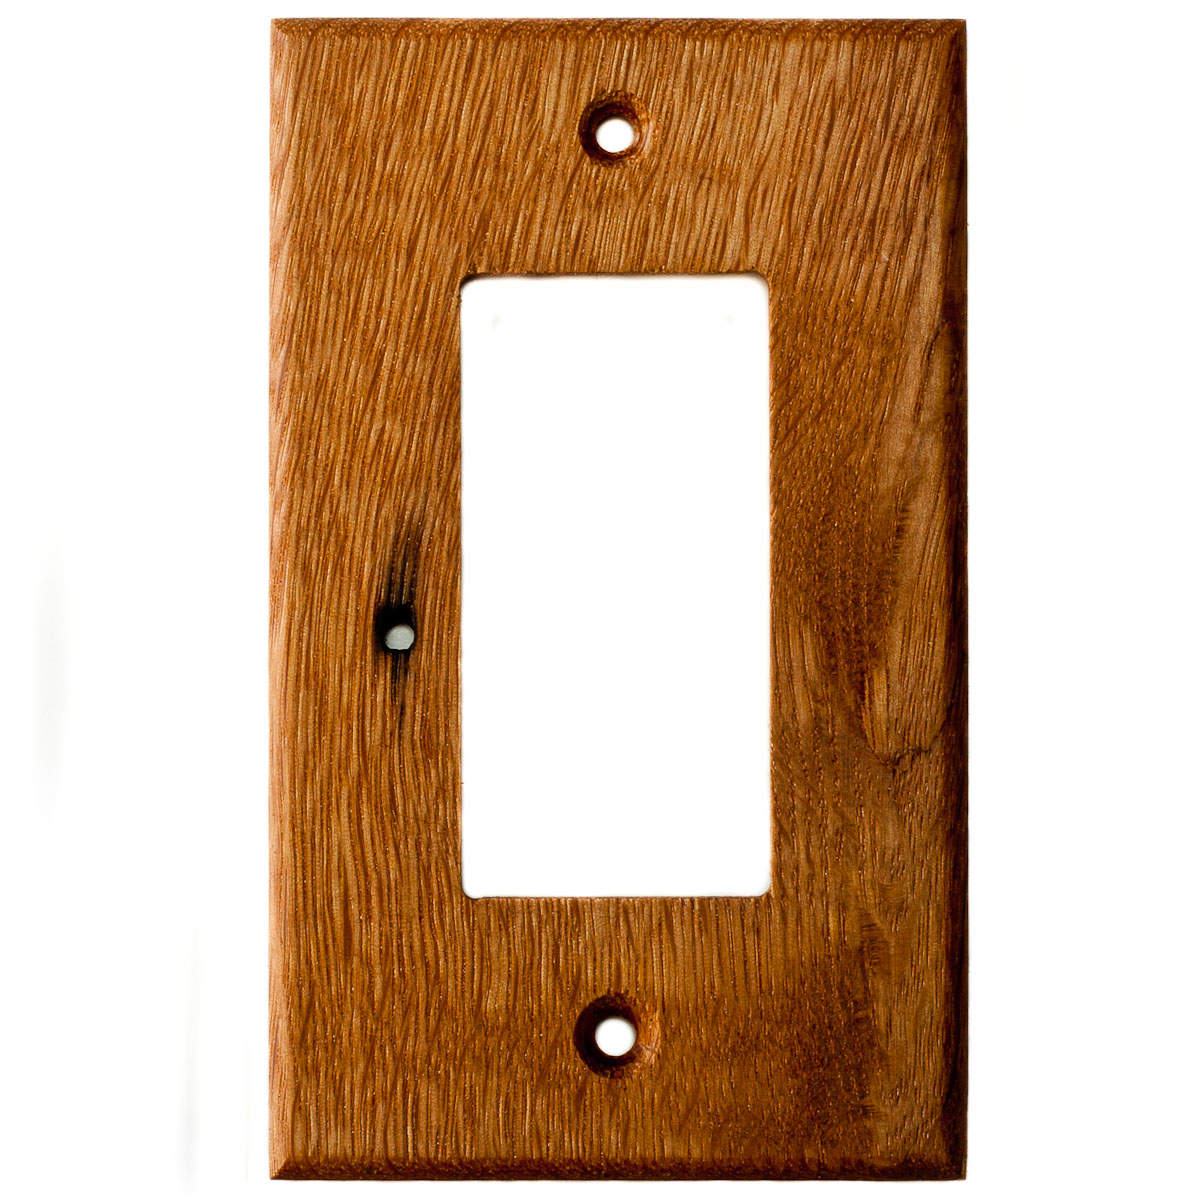 Oak Reclaimed Wood Wall Plate - 1 Gang GFCI Outlet Cover